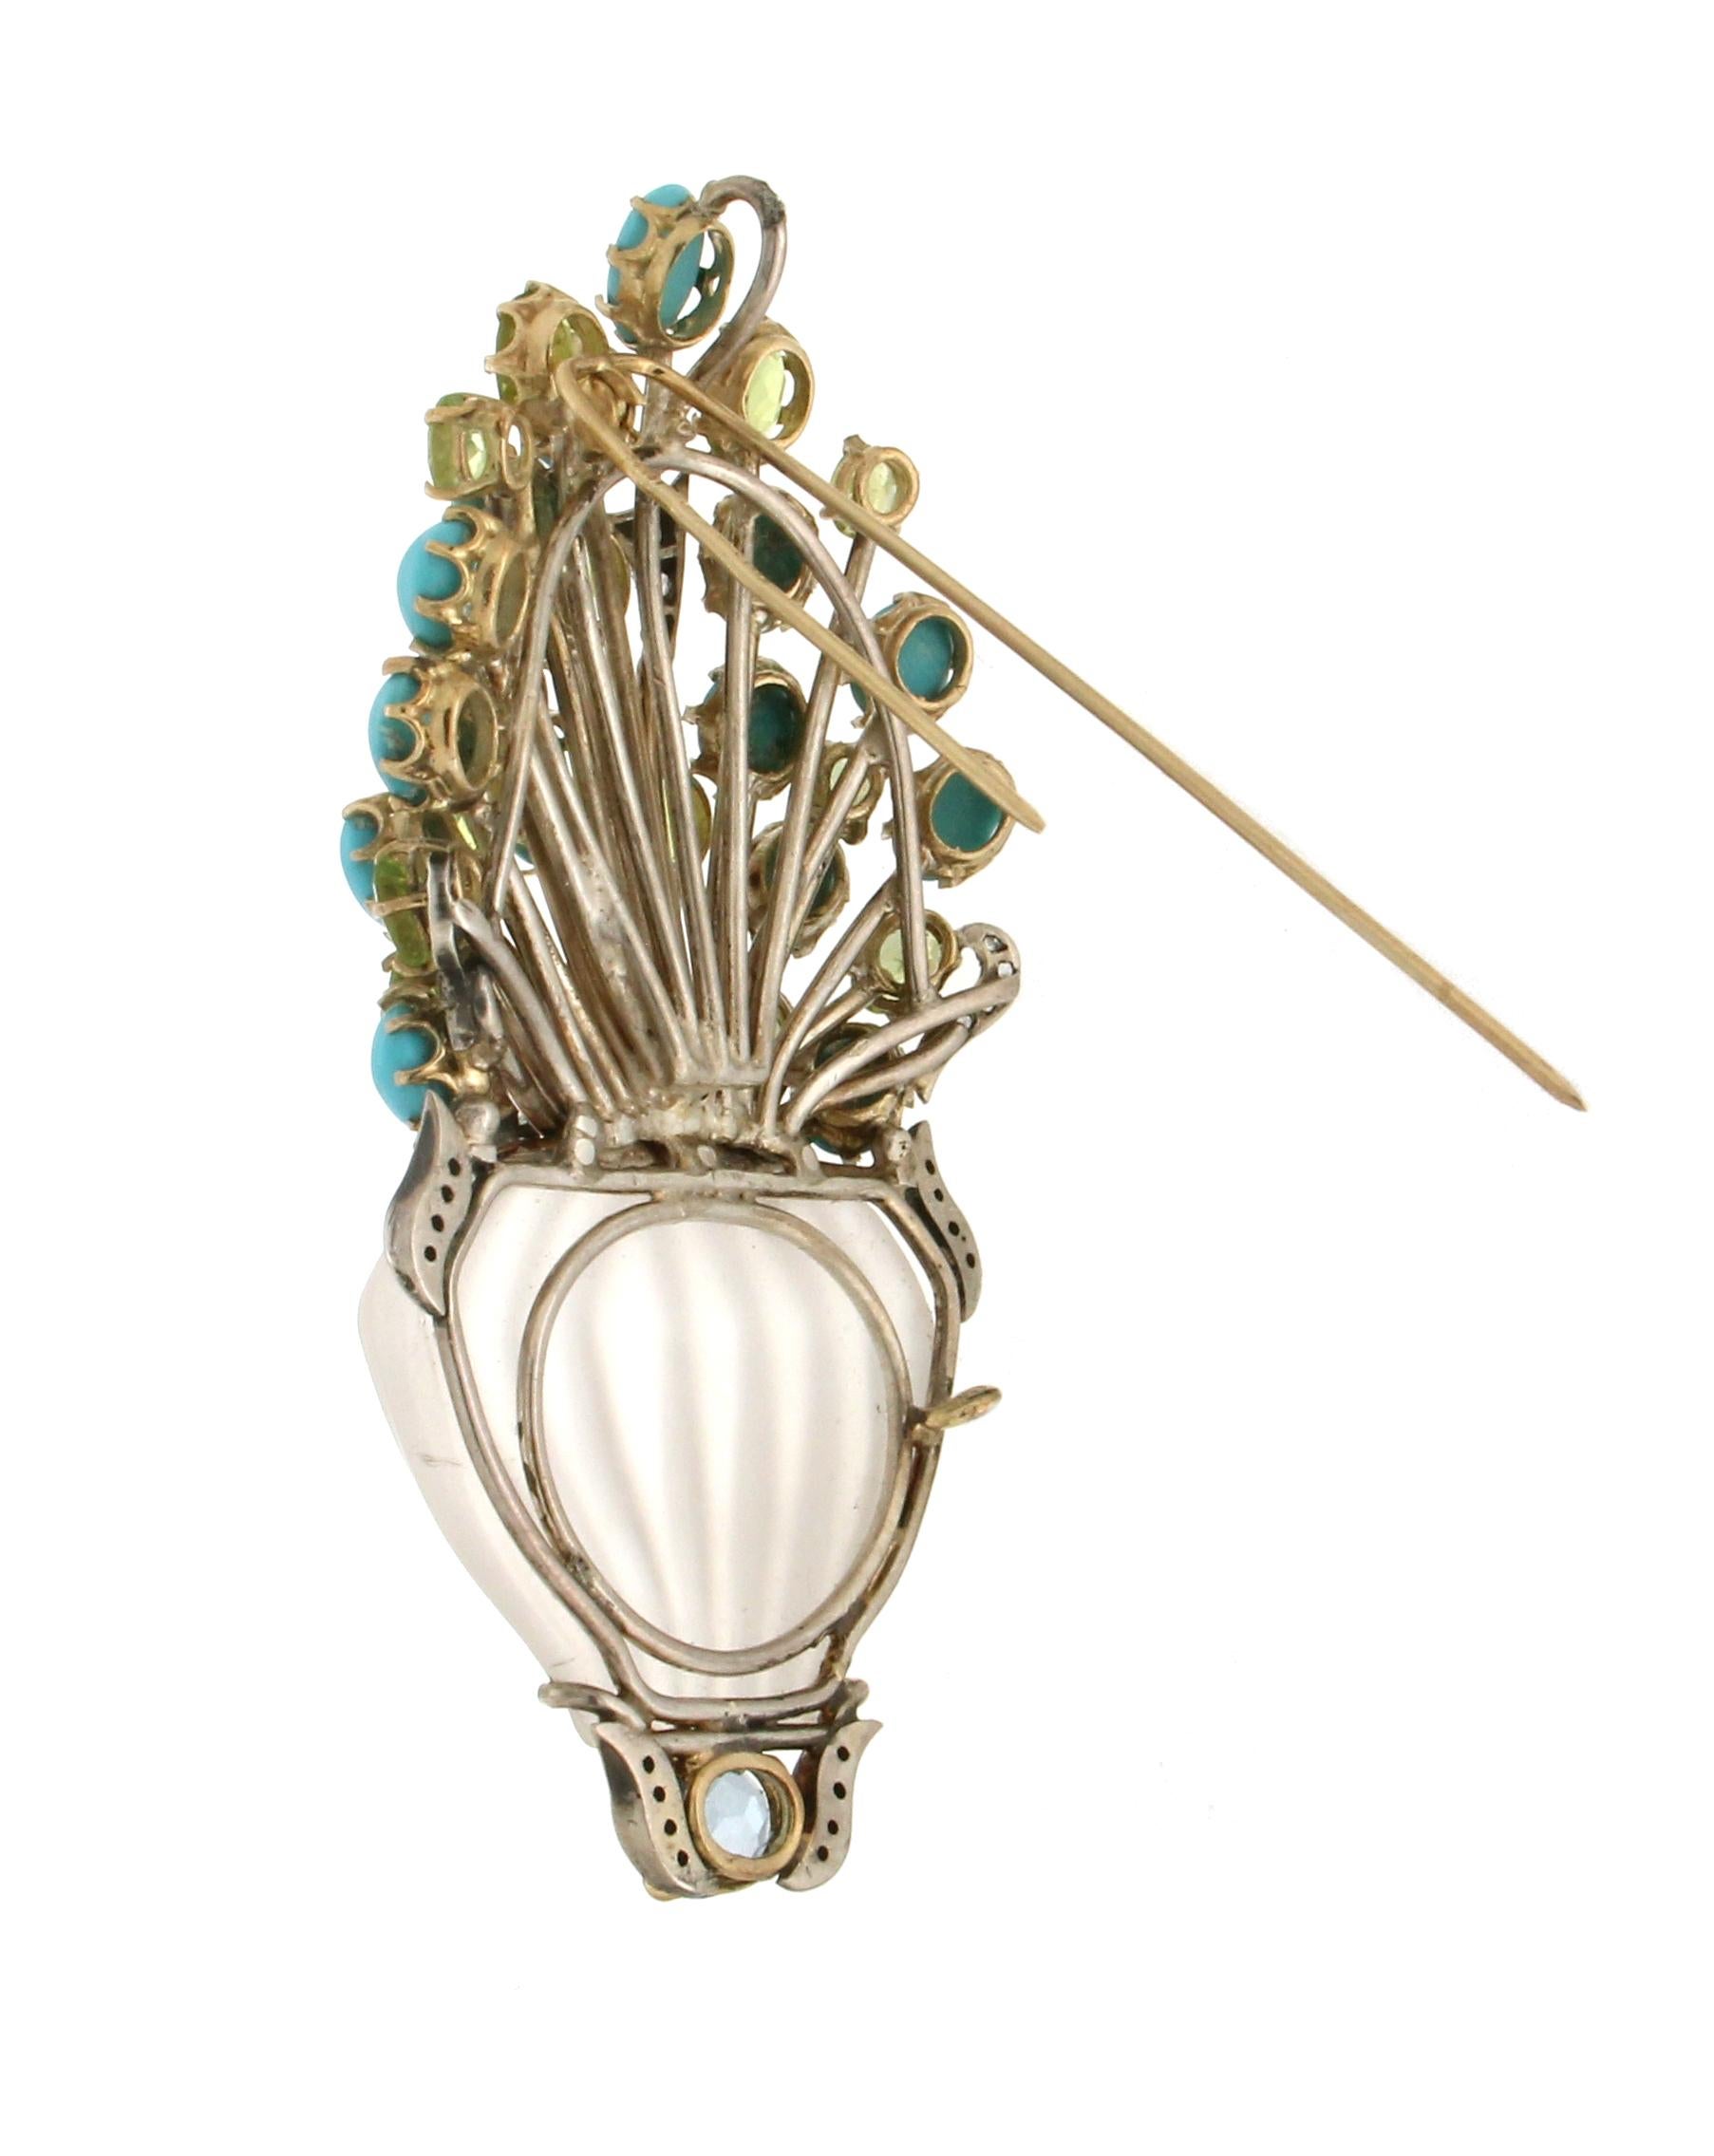 Handcraft Rock Crystal Vase 14 Karat Yellow Gold Diamonds Brooch Pendant In New Condition For Sale In Marcianise, IT